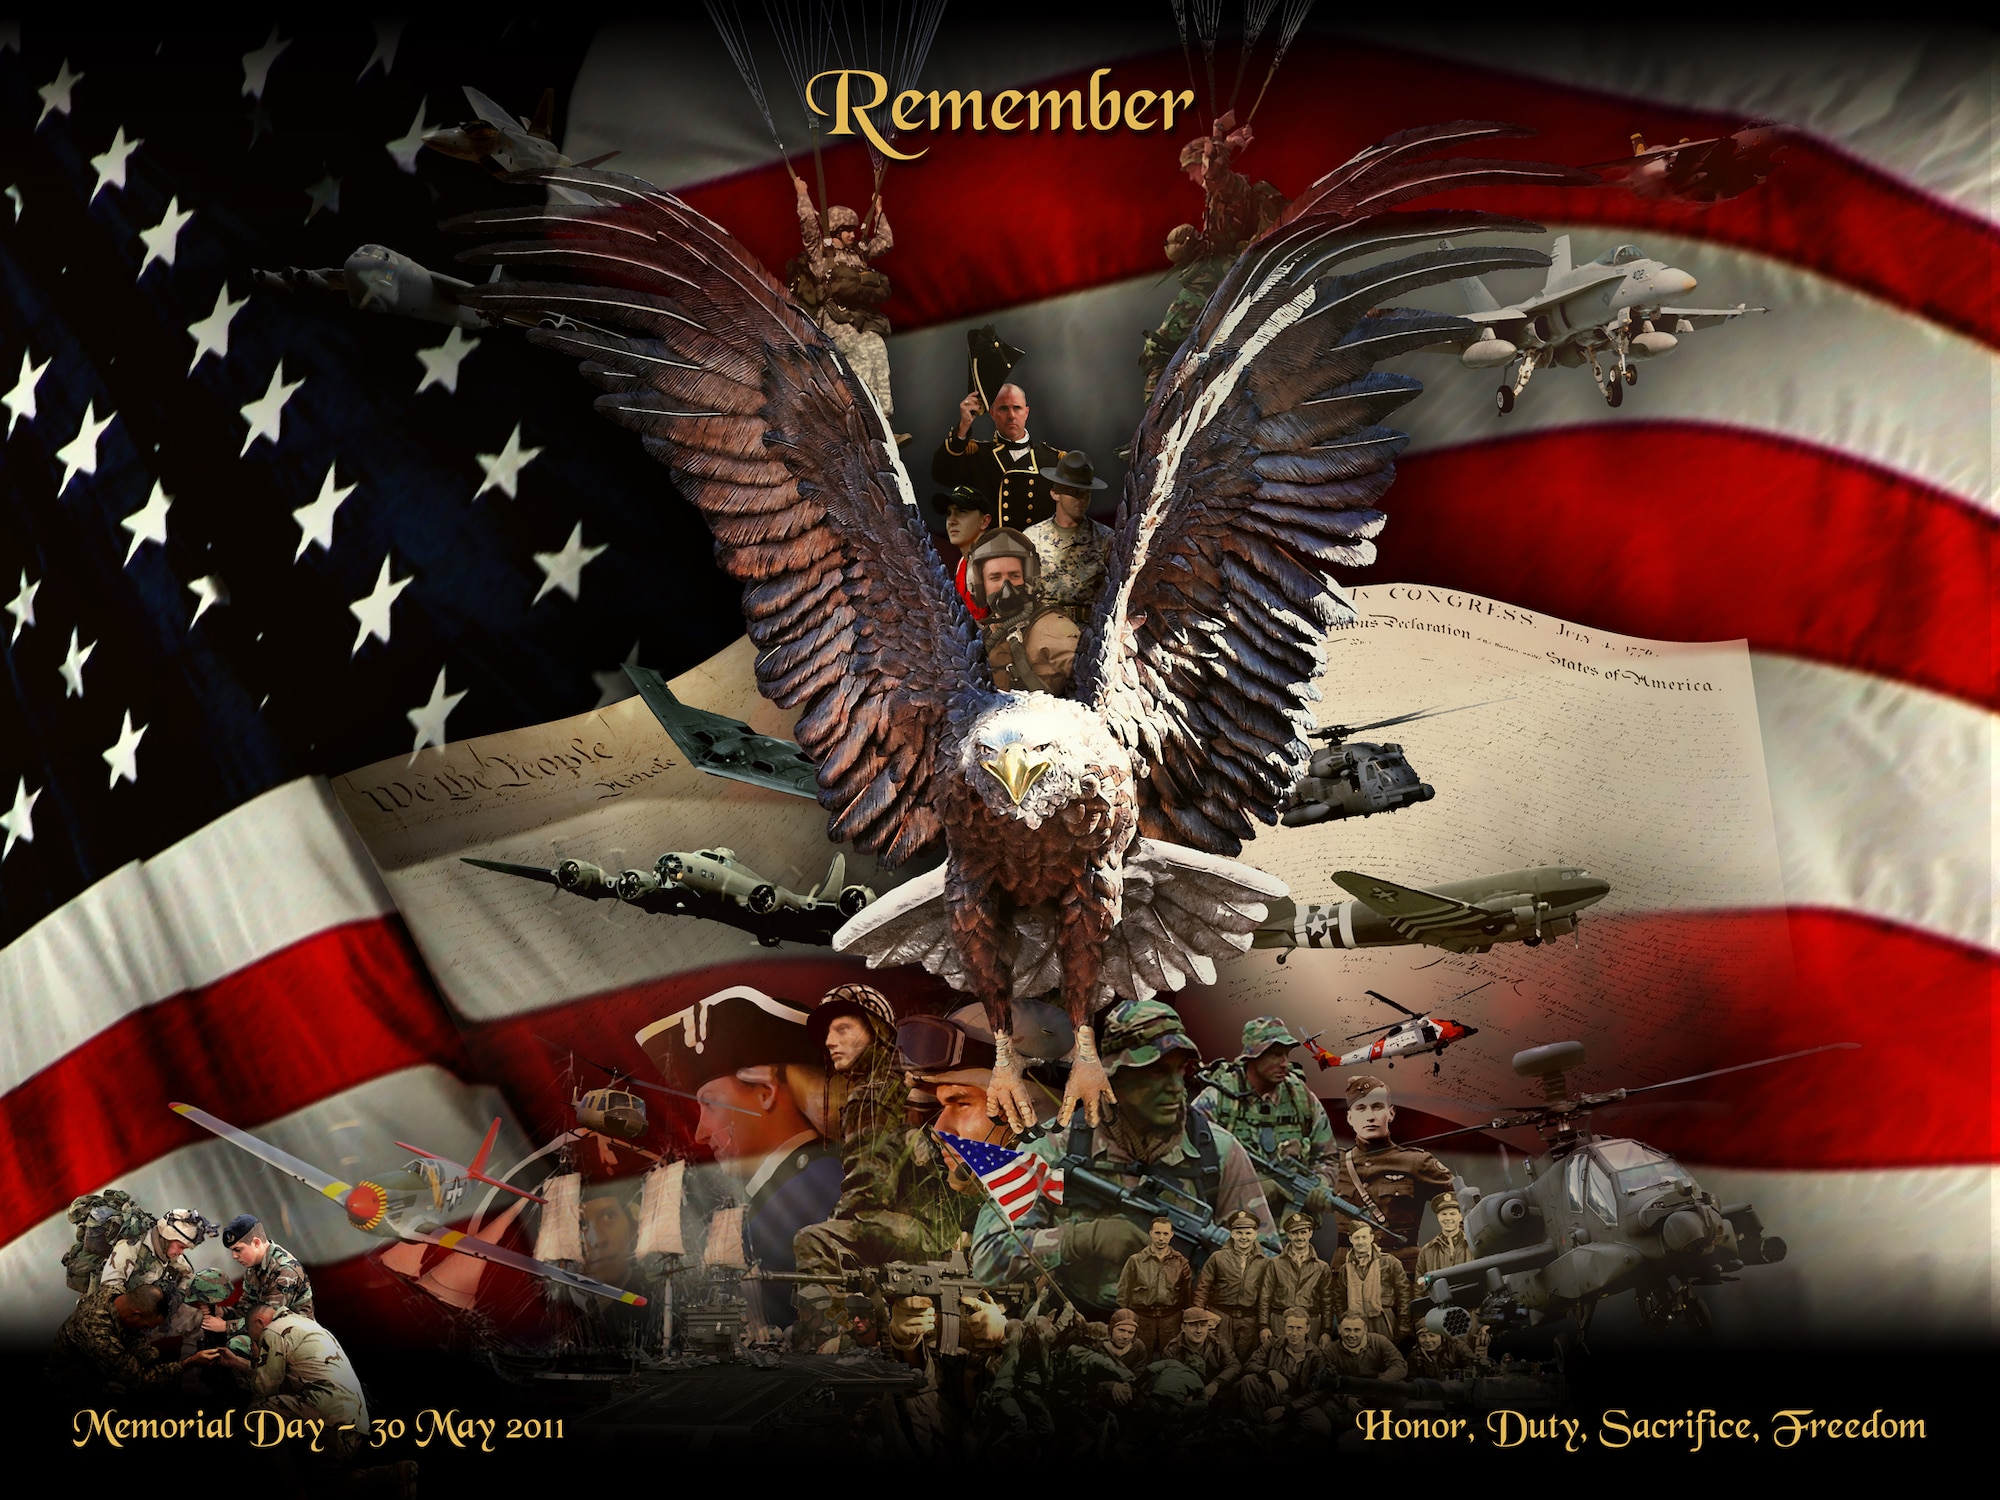 Memorial Day 2011. Created by Ken Chandler. This image is 8x10 @ 72 ppi. PDF files for this image, up to 48x32 inches @ 150 ppi, are available by contacting afgraphics@dma.mil. This image is copyrighted and is the property of Ken Chandler and is available only to members of the armed forces and military organizations.